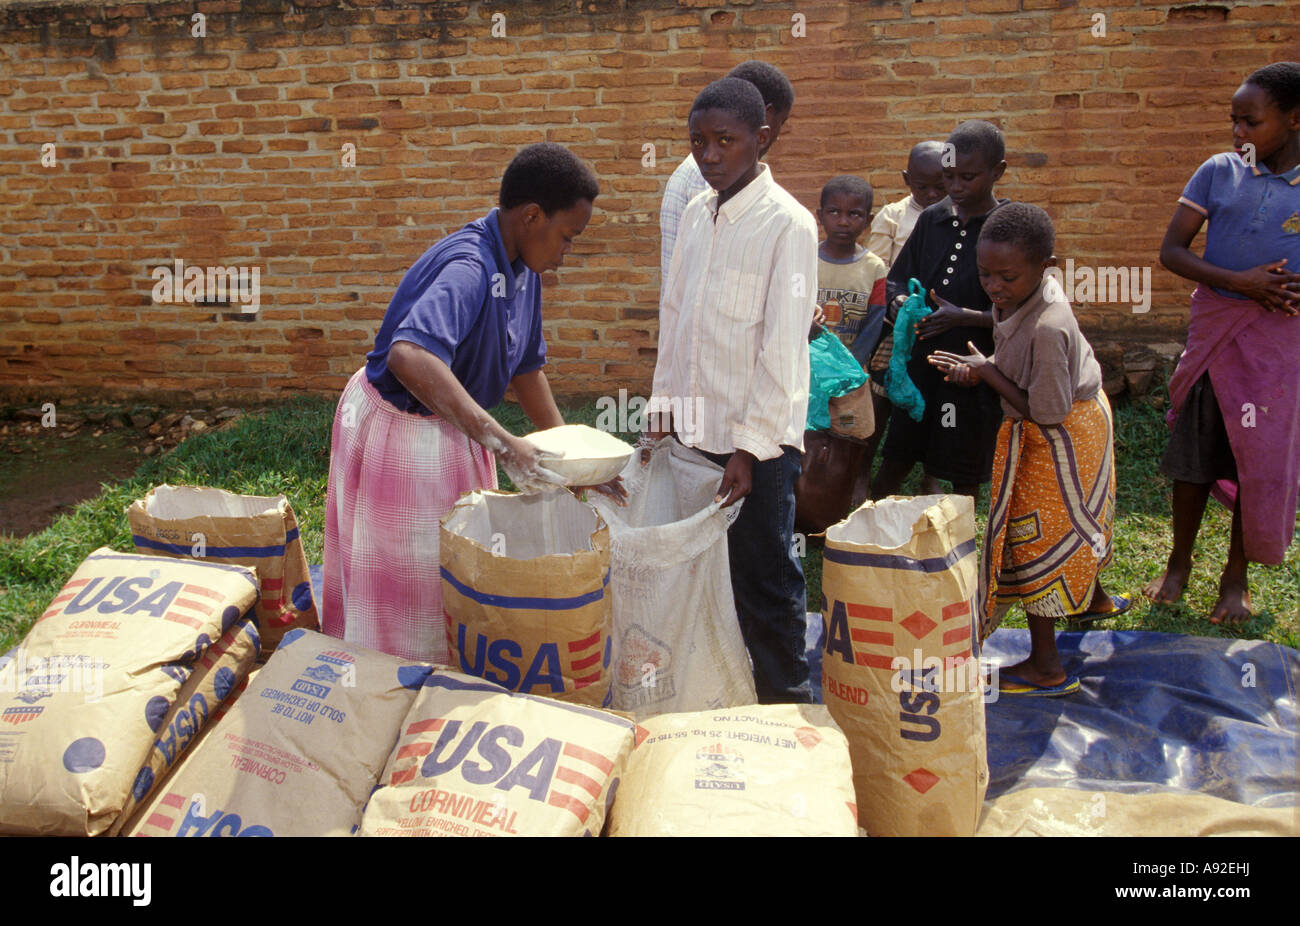 Foreign aid for People in Ruanda Africa Stock Photo